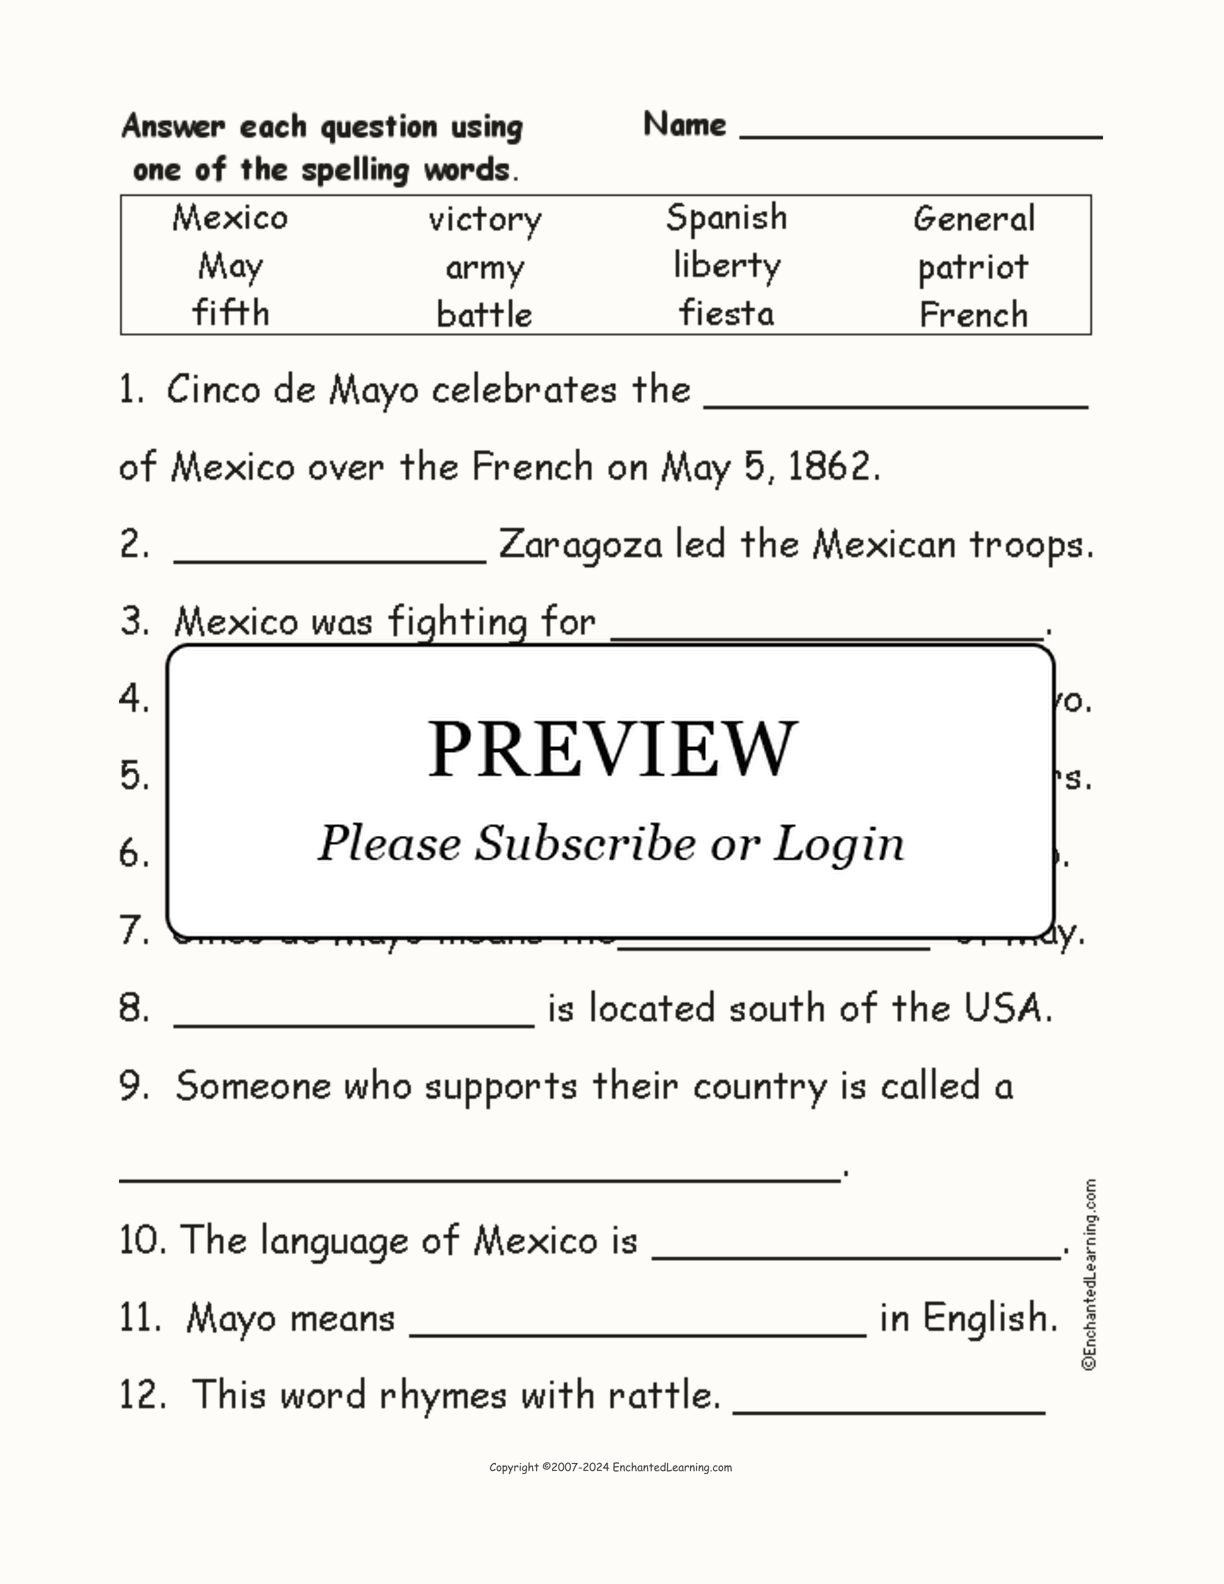 Cinco de Mayo Spelling Word Questions interactive worksheet page 1